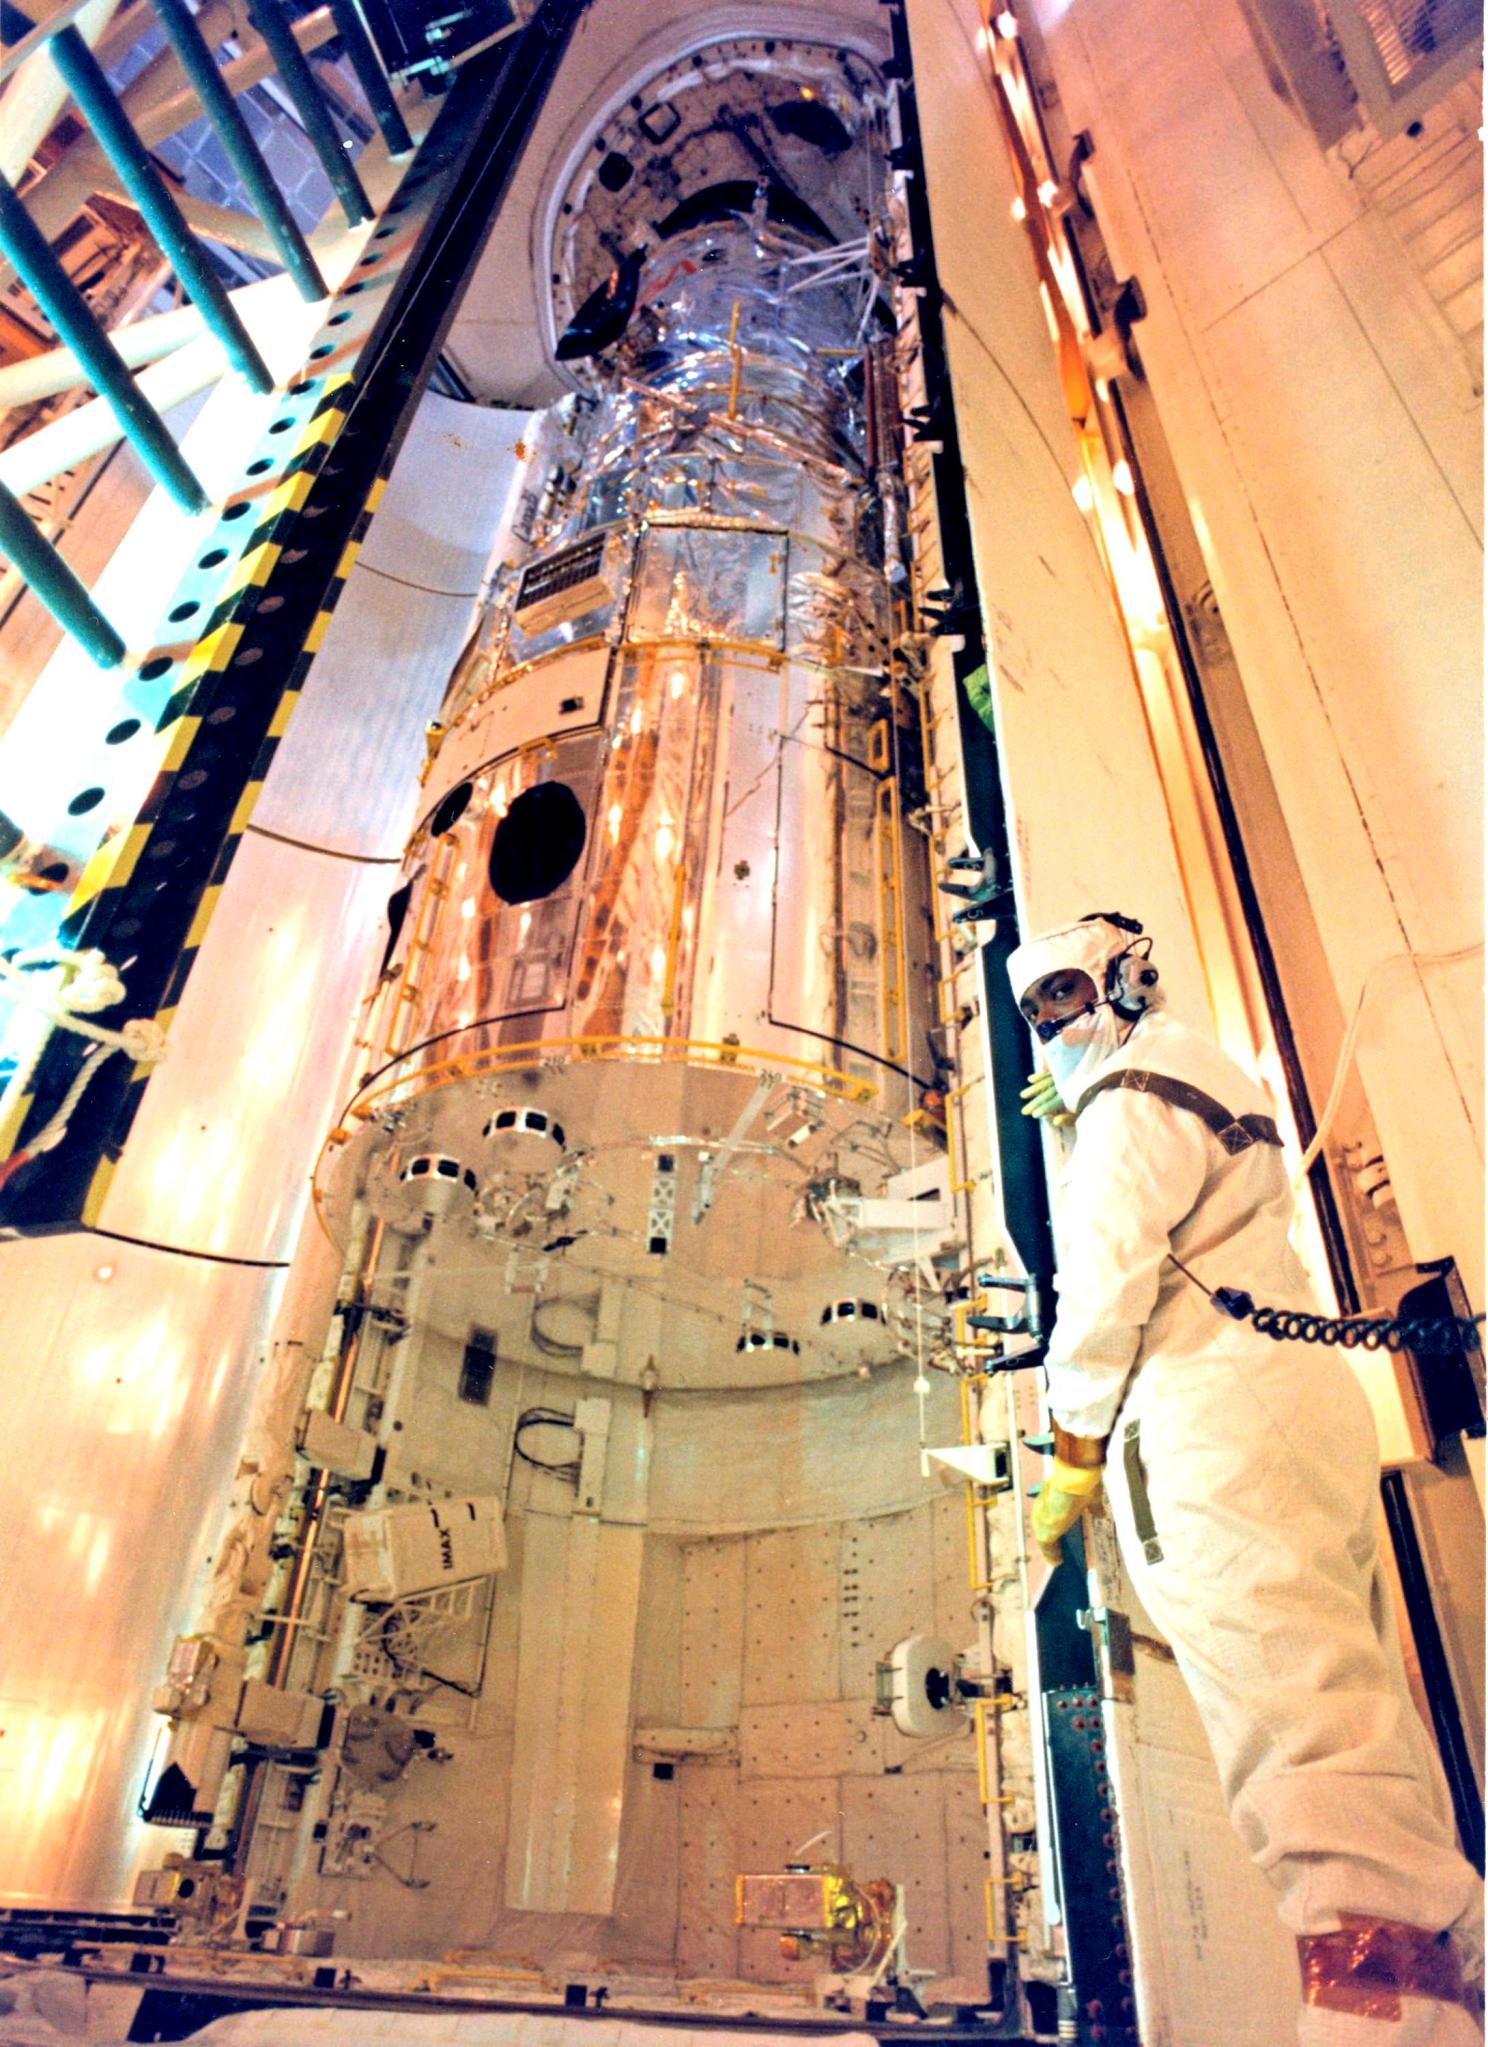 The Hubble Space Telescope in the Vertical Processing Facility.